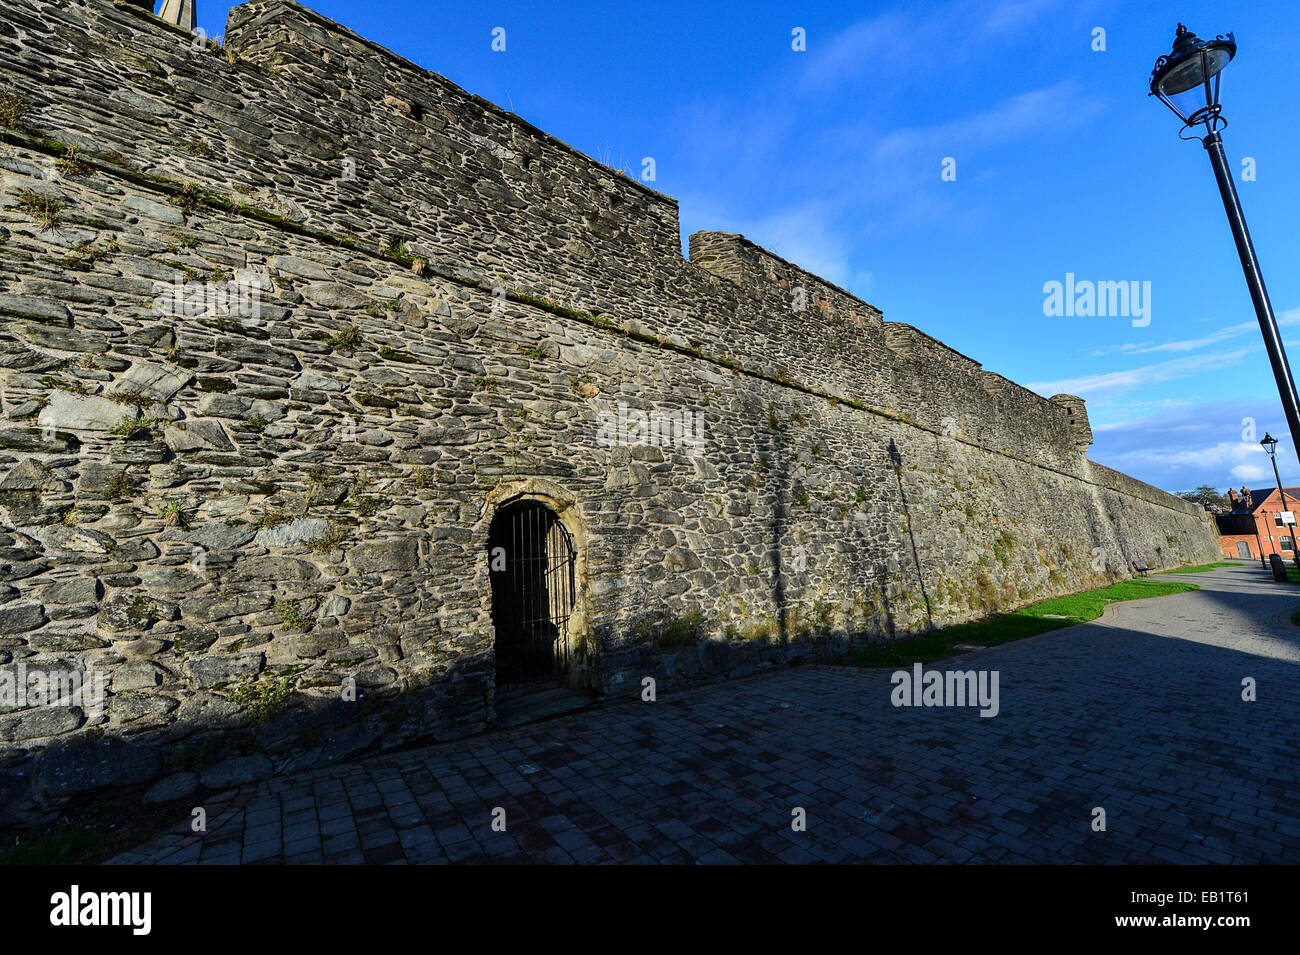 Exterior section of Derry Walls. Photo: George Sweeney/Alamy Stock Photo